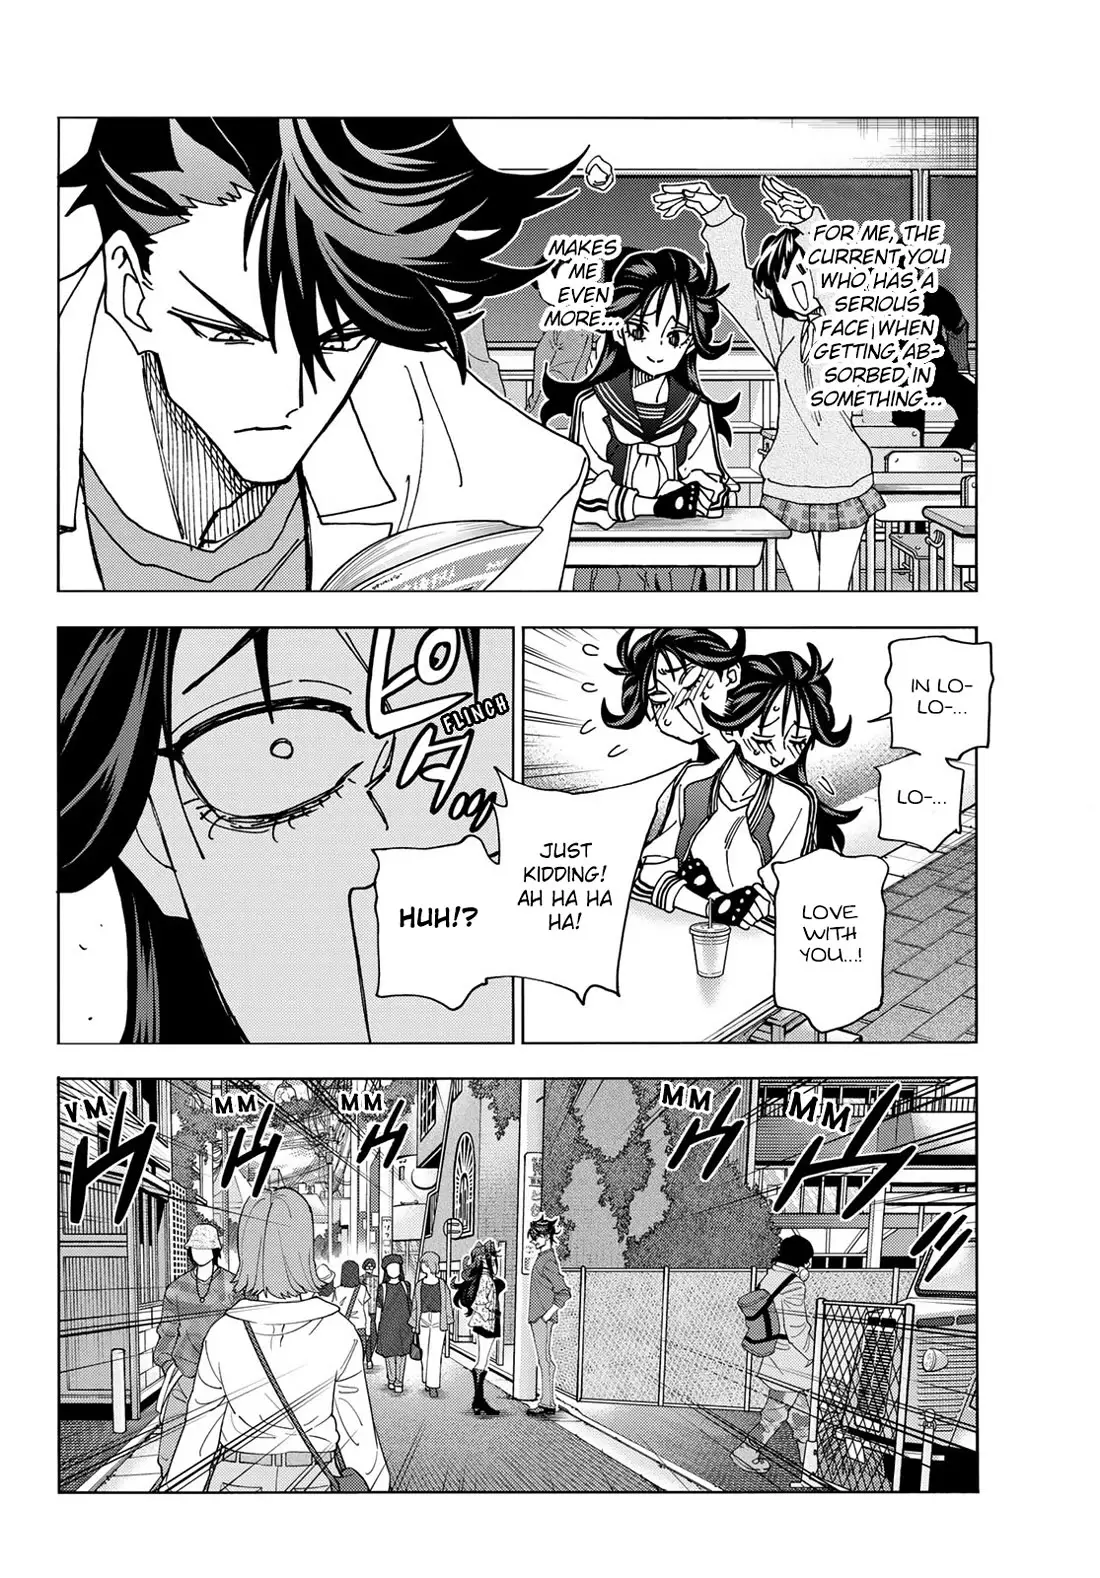 The Story Between A Dumb Prefect And A High School Girl With An Inappropriate Skirt Length - 67 page 4-dcefbb53